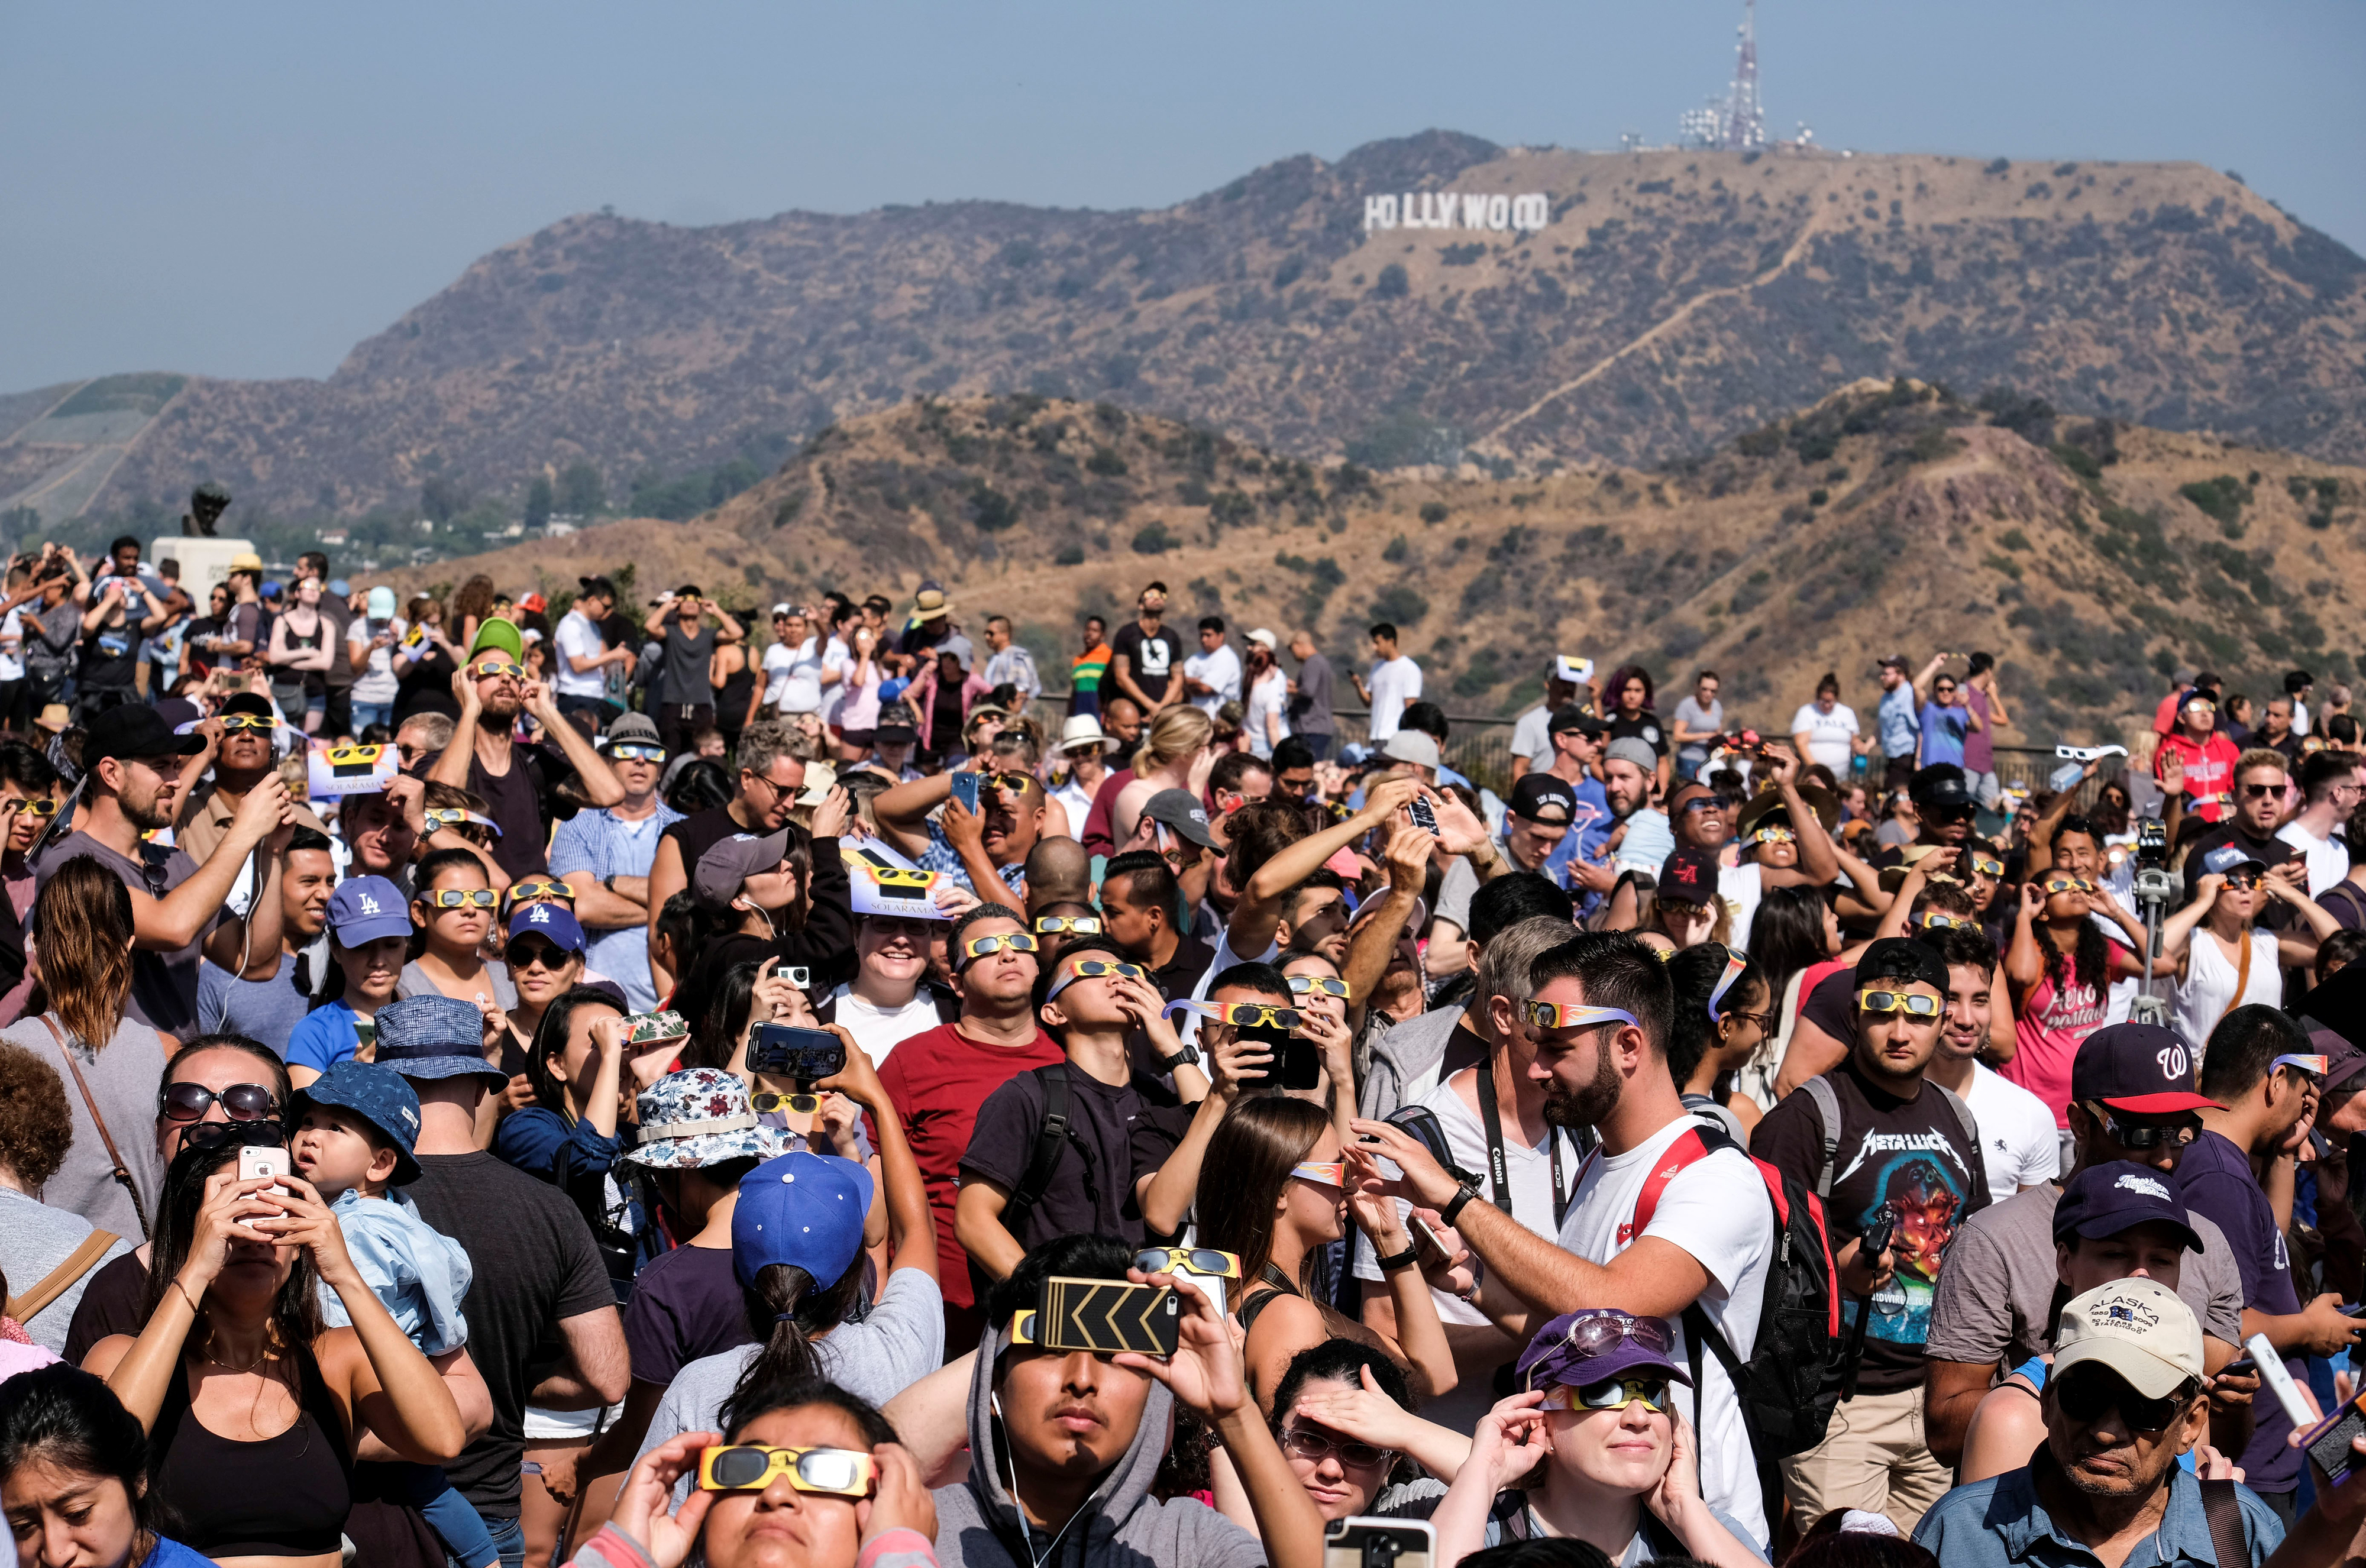 Crowd with eclipse glasses looking upwards near Hollywood sign